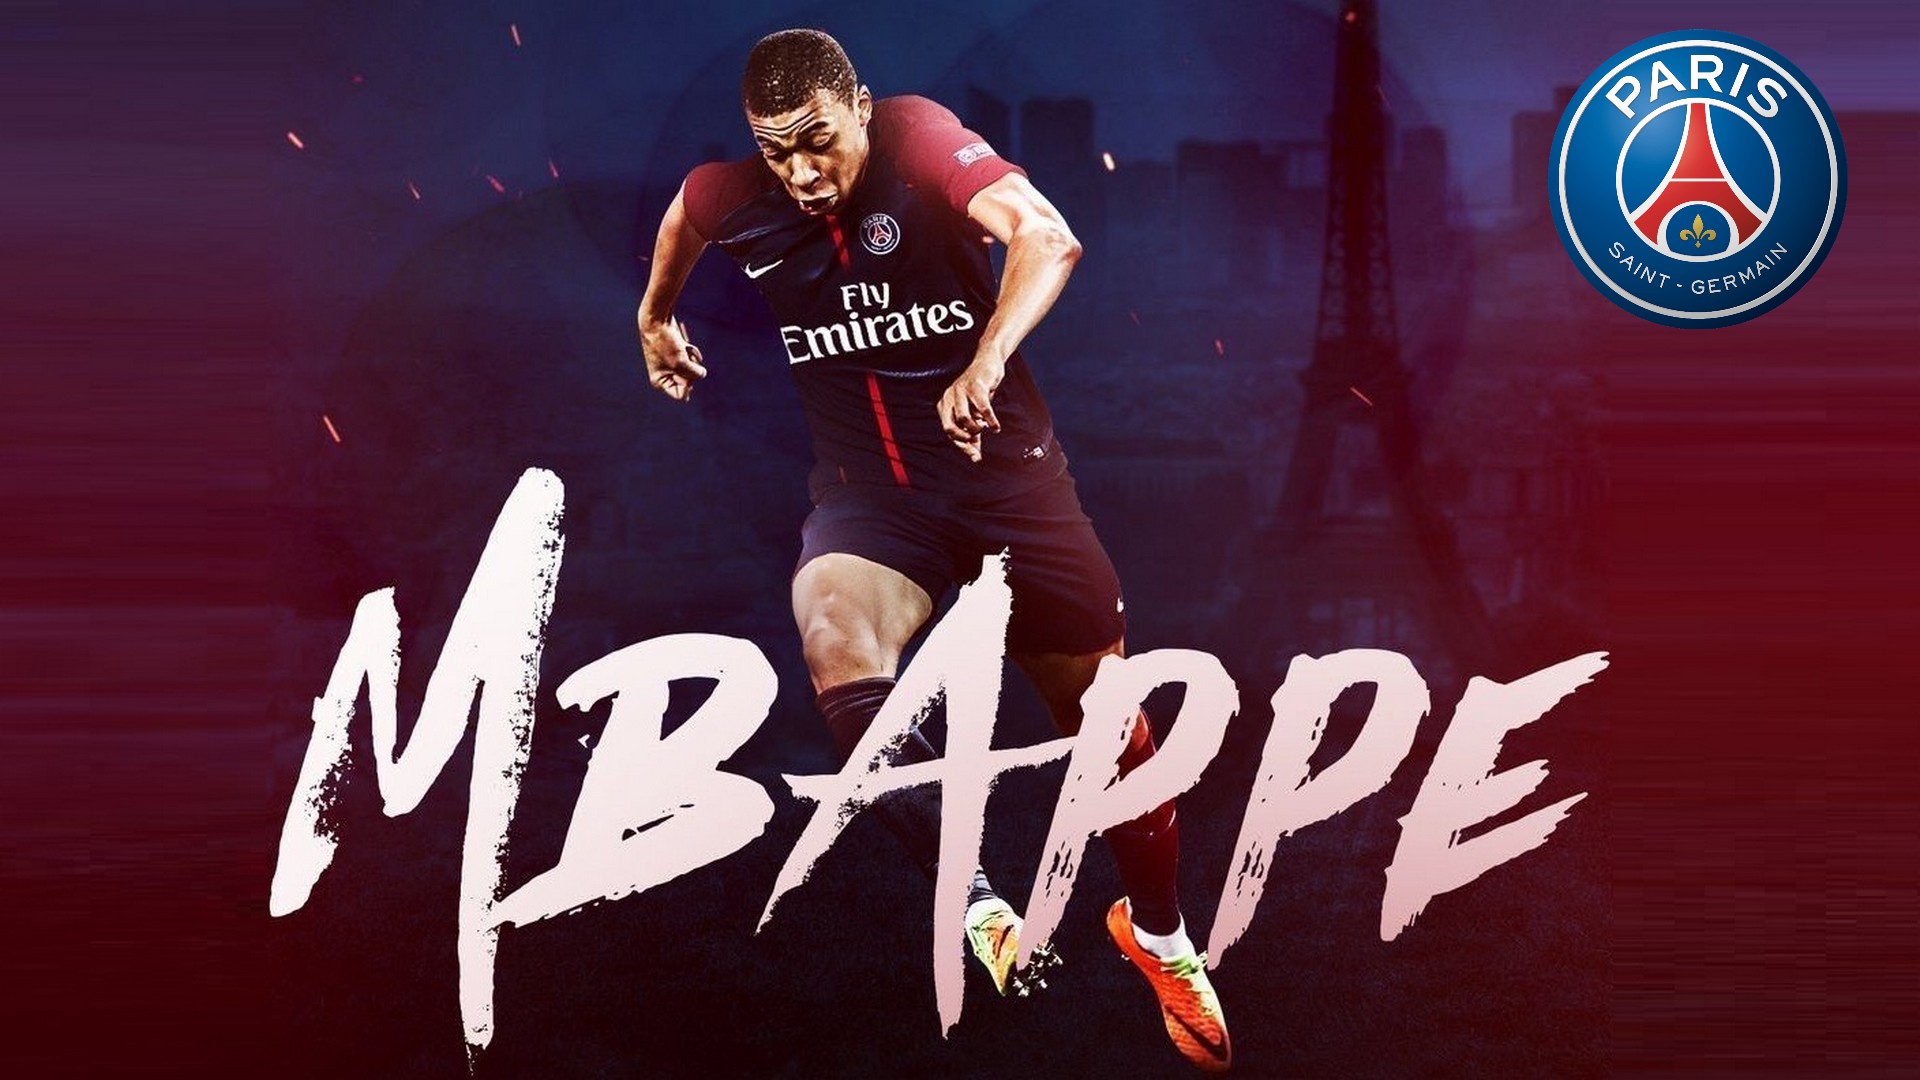 Wallpaper Desktop Mbappe Paris Saint-Germain HD with resolution 1920x1080 pixel. You can make this wallpaper for your Mac or Windows Desktop Background, iPhone, Android or Tablet and another Smartphone device